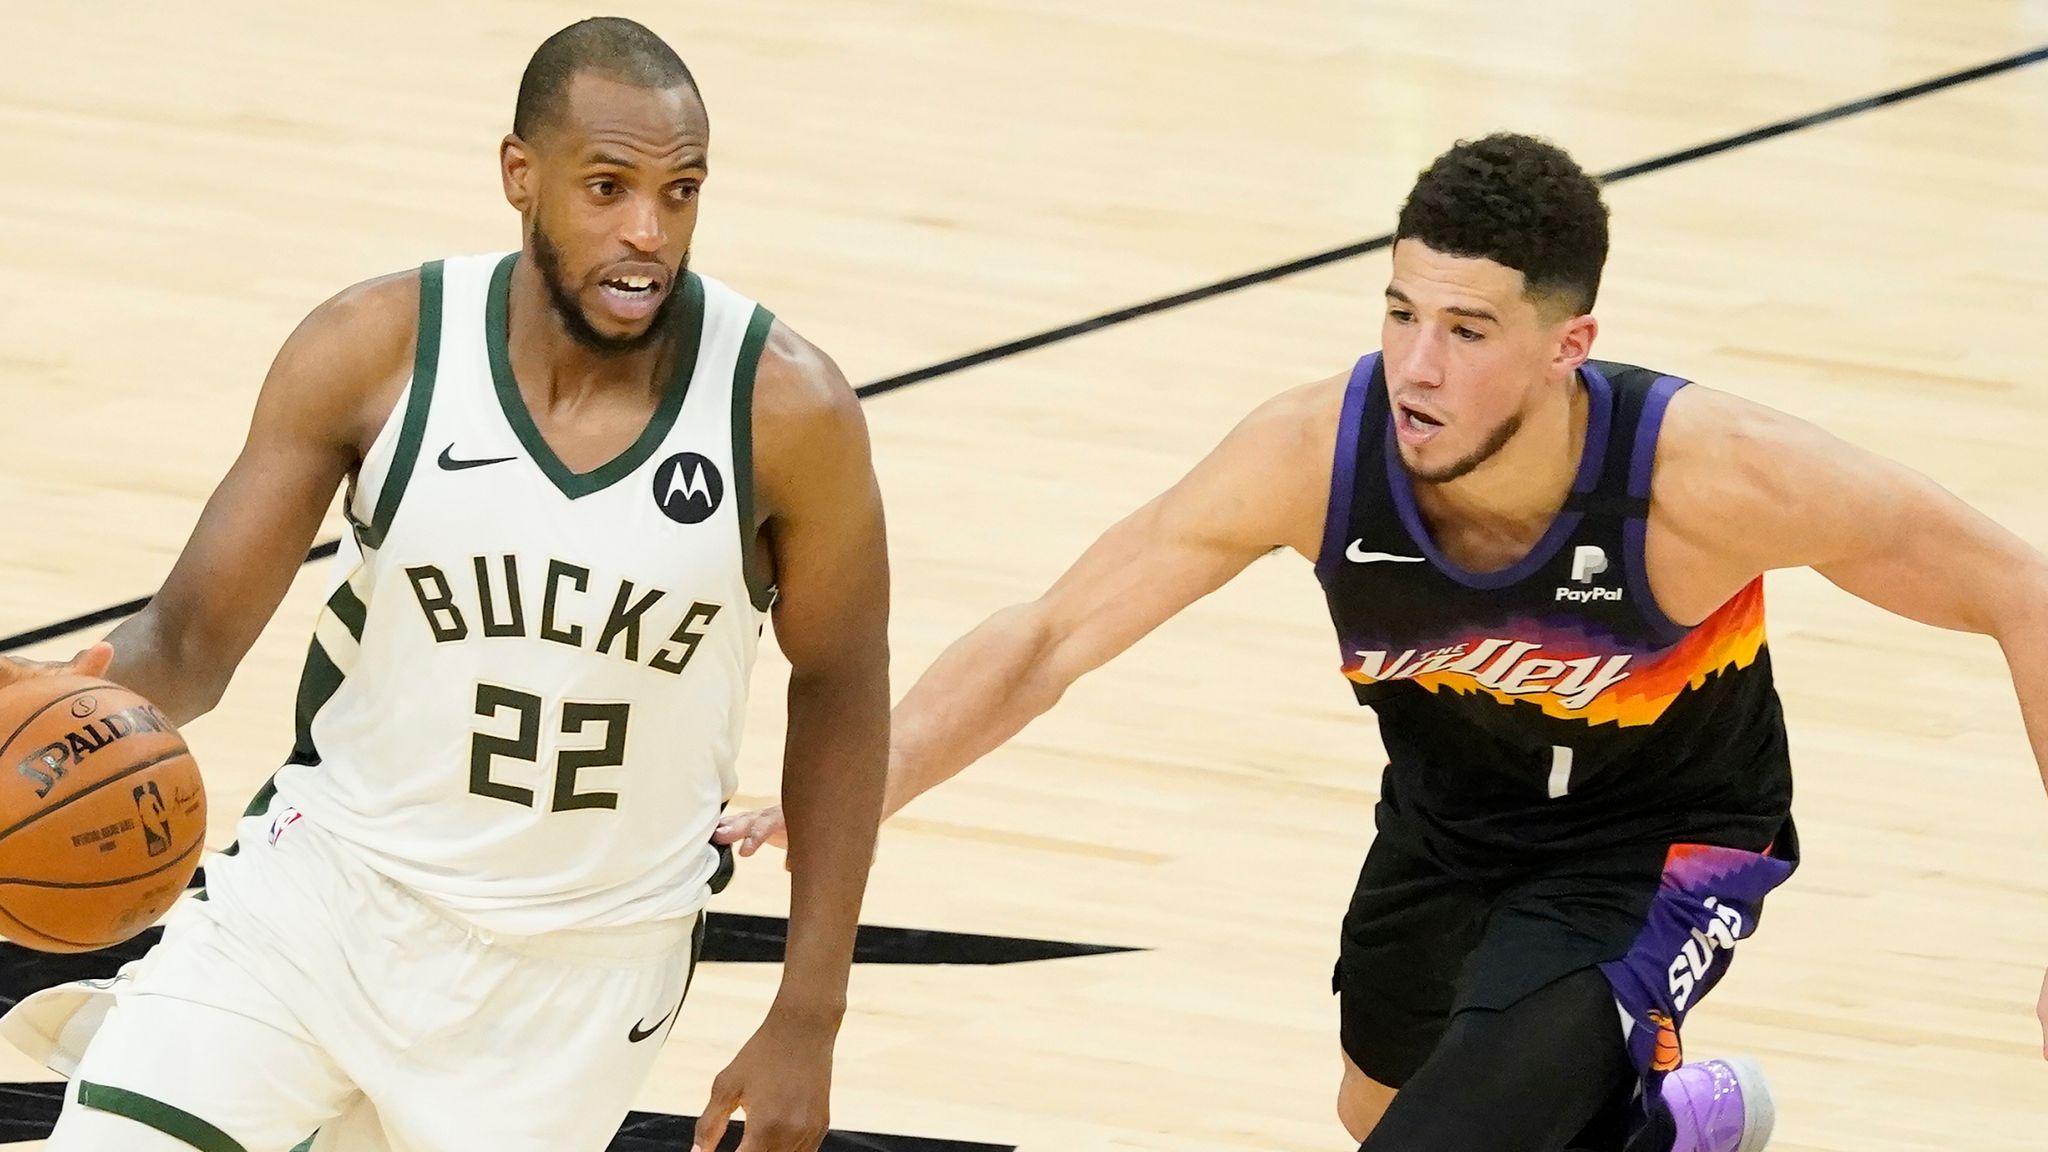 Devin Booker is cheering for Khris Middleton and the Bucks - Los